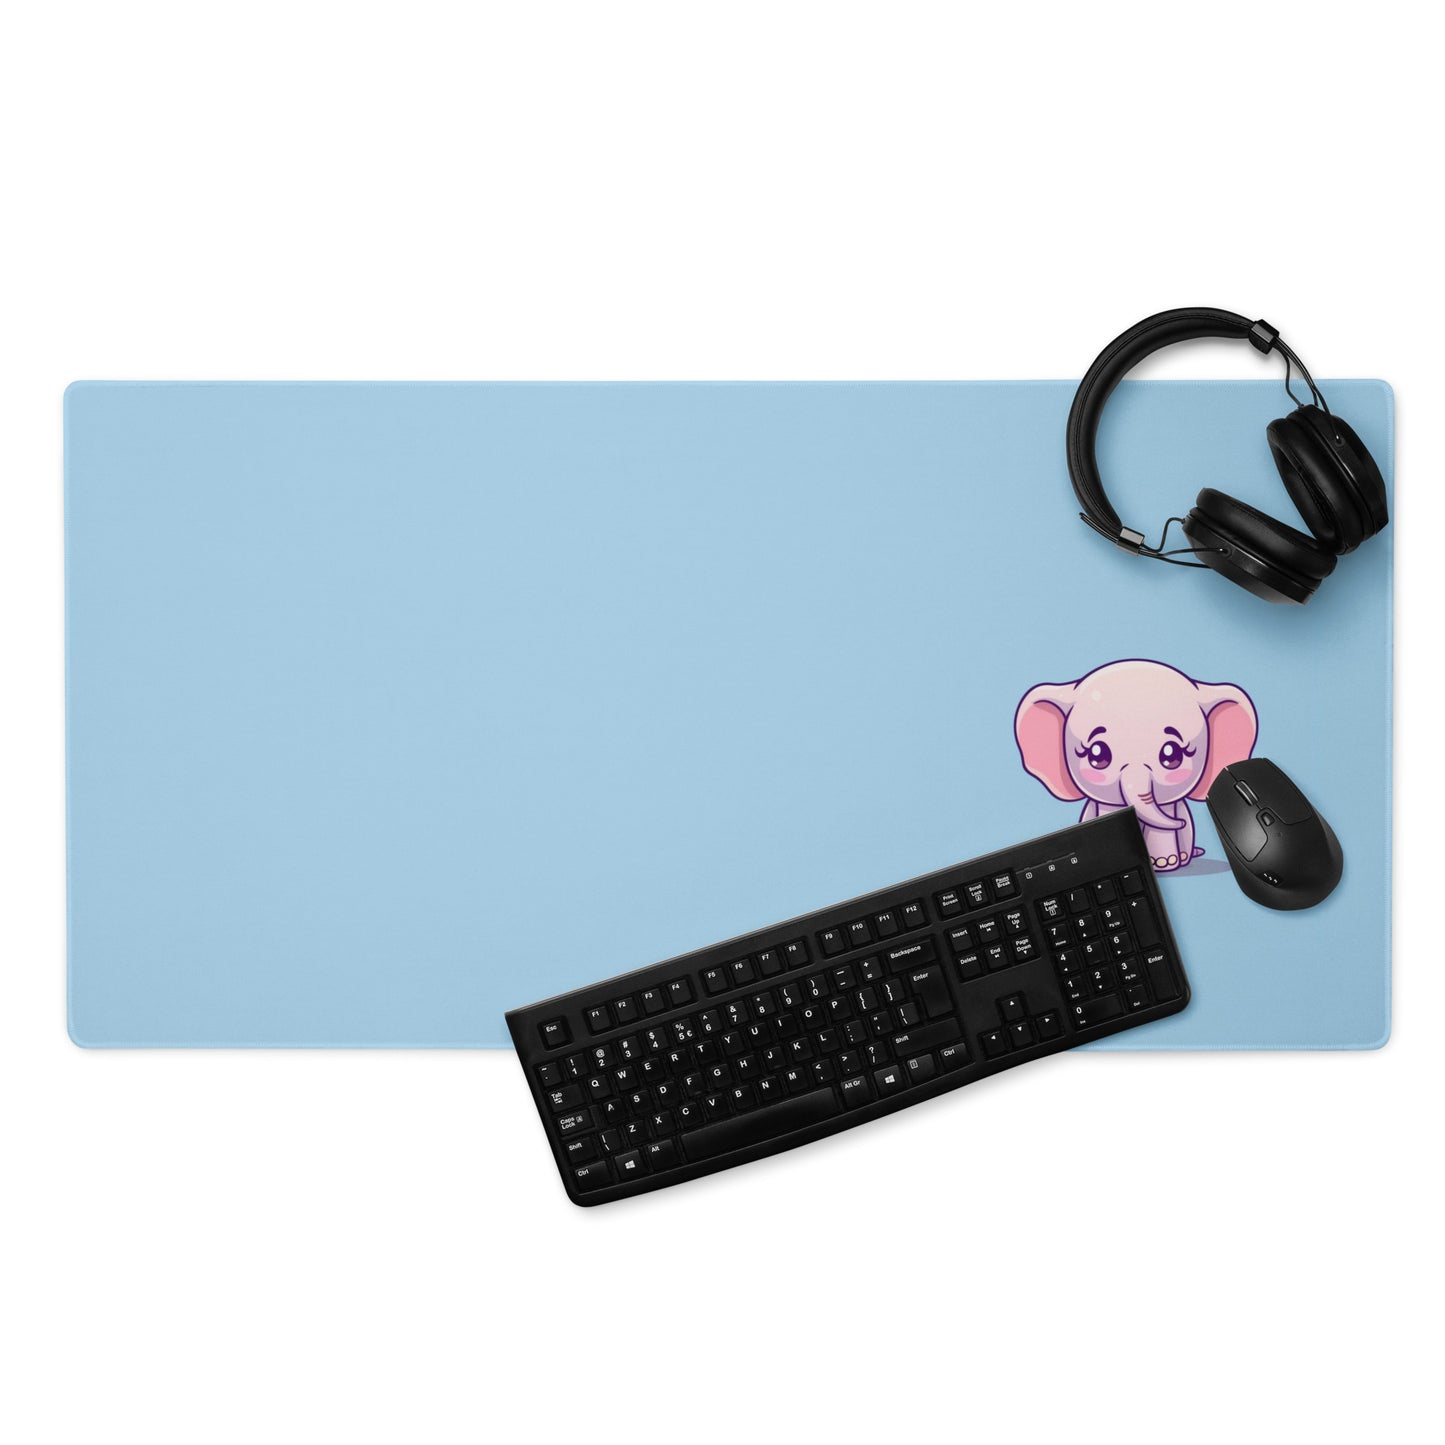 A 36" x 18" desk pad with a cute elephant on it displayed with a keyboard, headphones and a mouse. Blue in color.